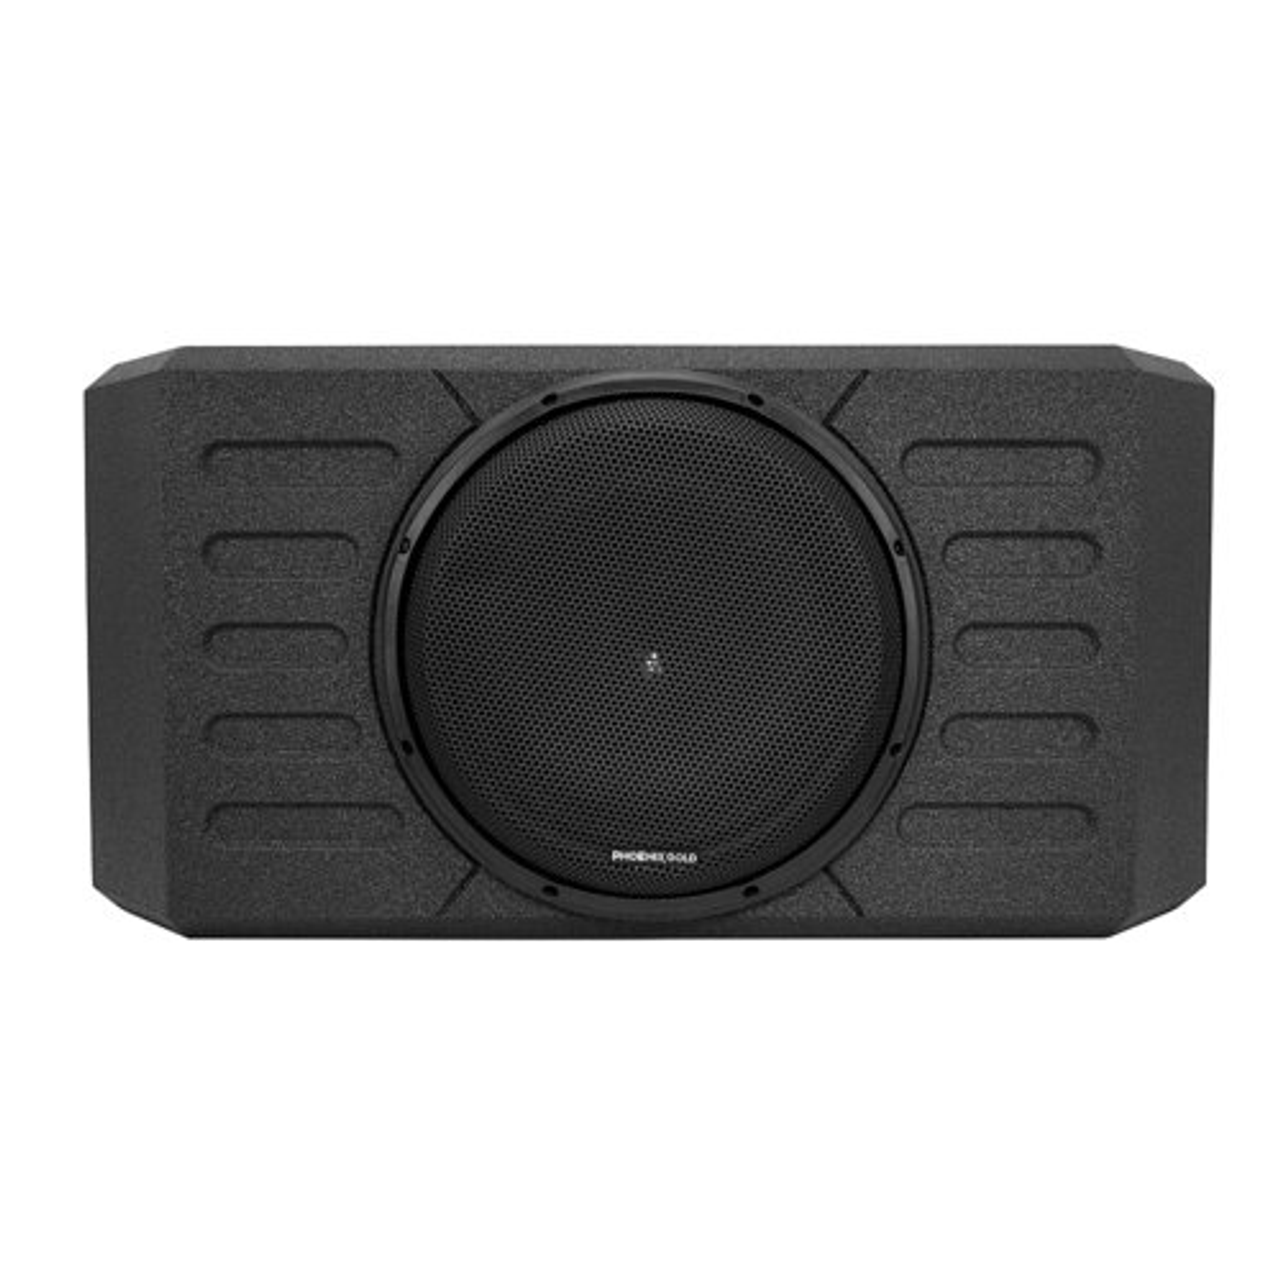 Phoenix Gold - 12” 400W 2-Ohm Loaded Swing Gate-Mounted Subwoofer Enclosure for Select 2007-2021 Jeep Wrangler Vehicles - Black